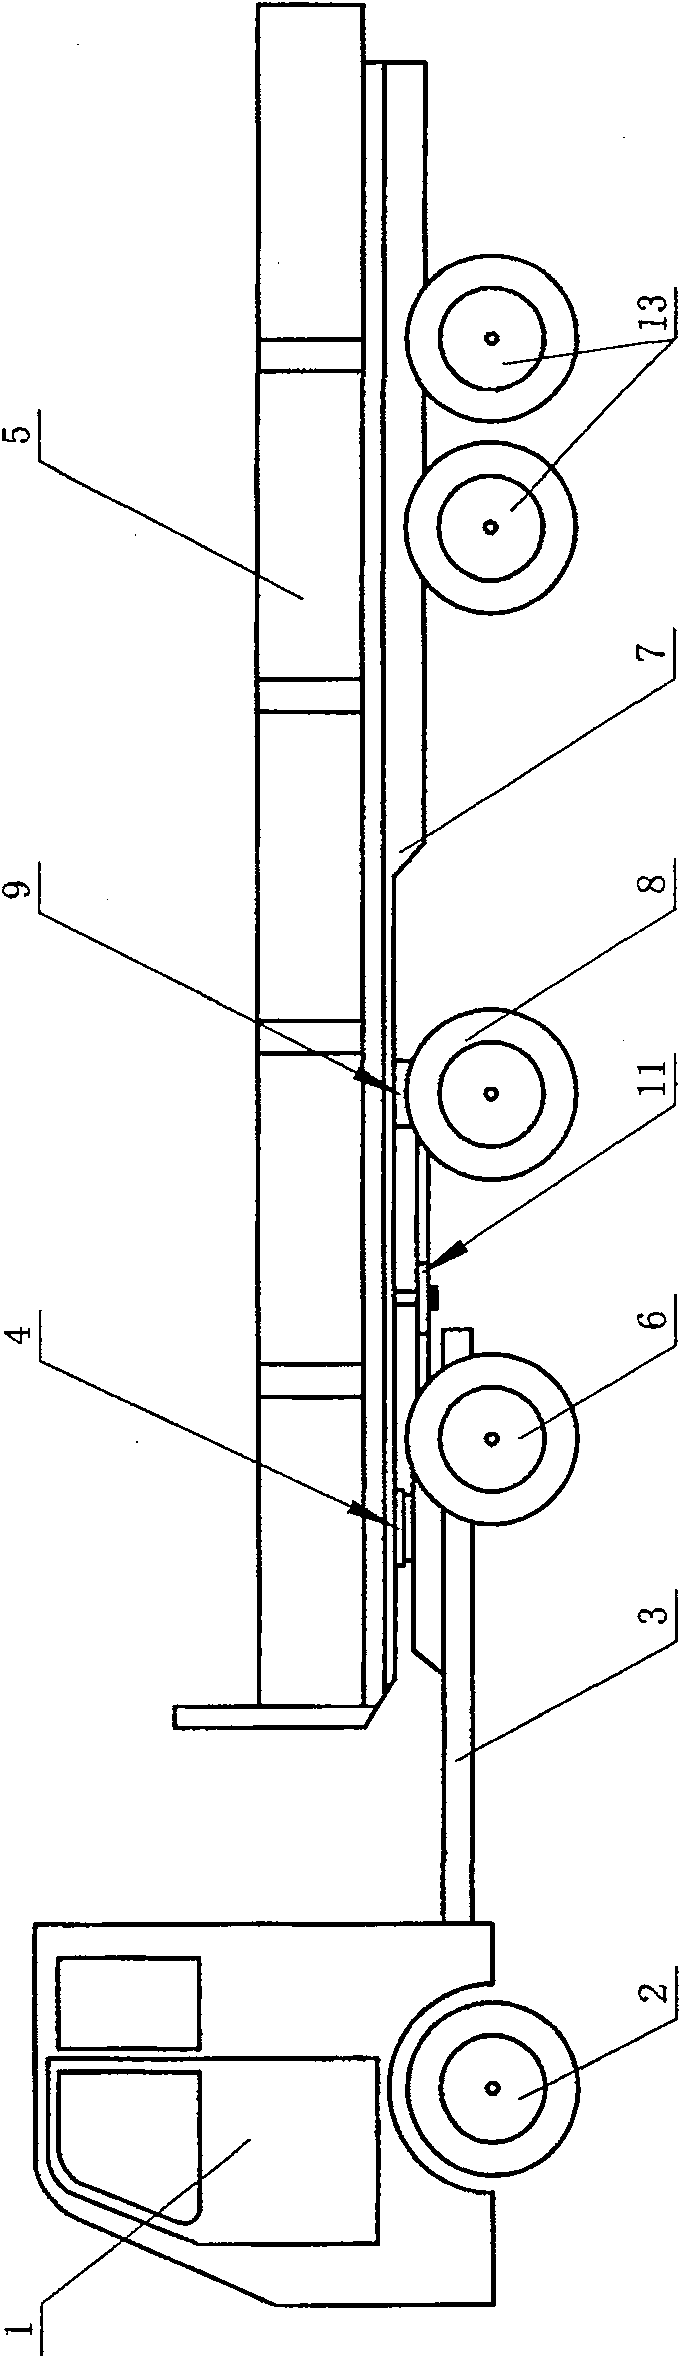 Semi-trailer with automatic synchronization steering mechanism